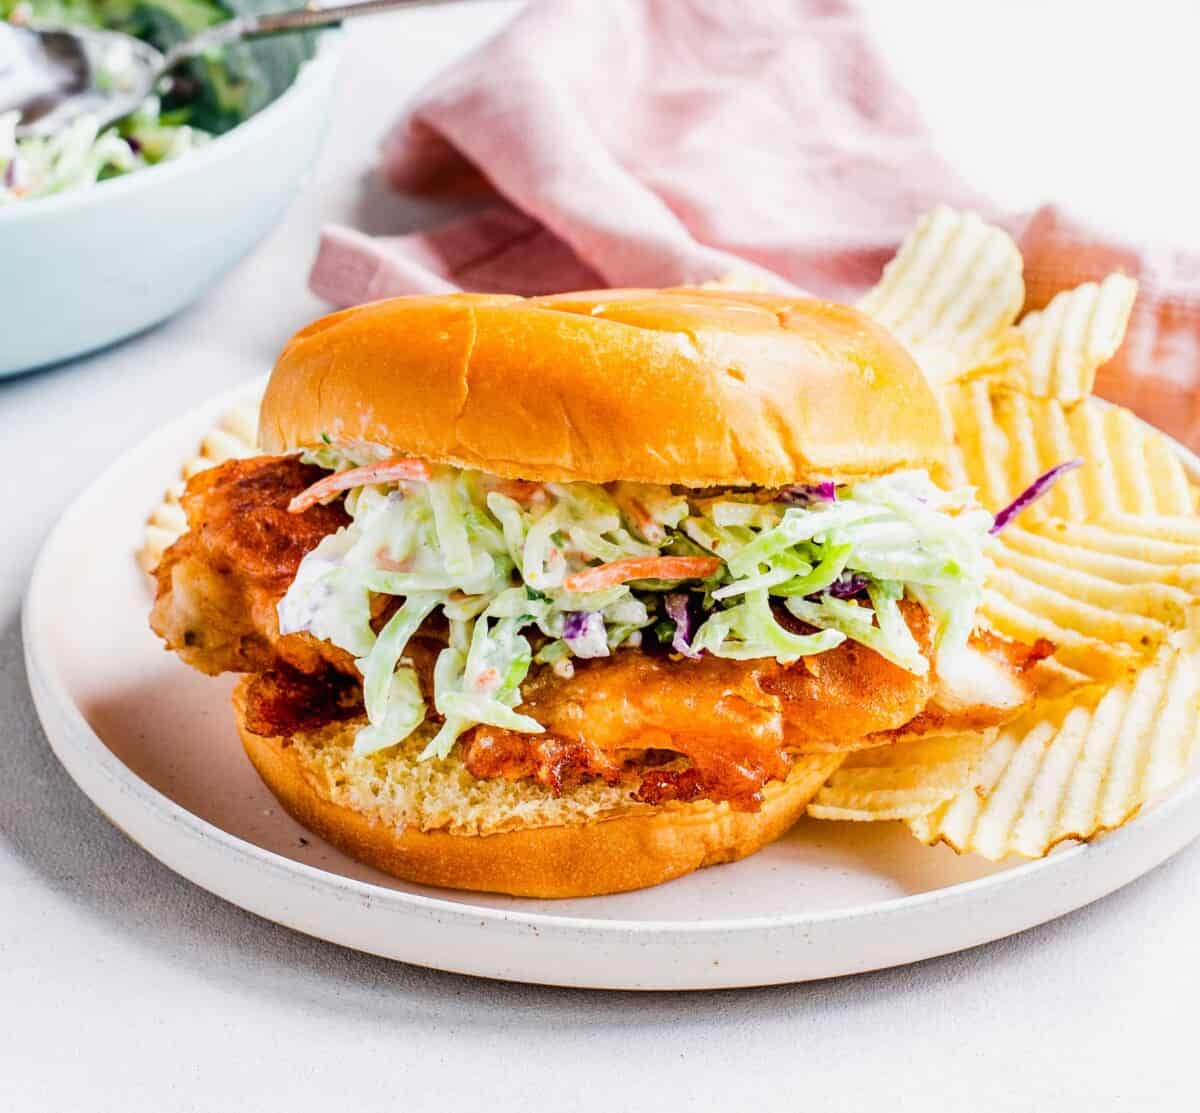 Potato chips are placed next to a chicken sandwich. 